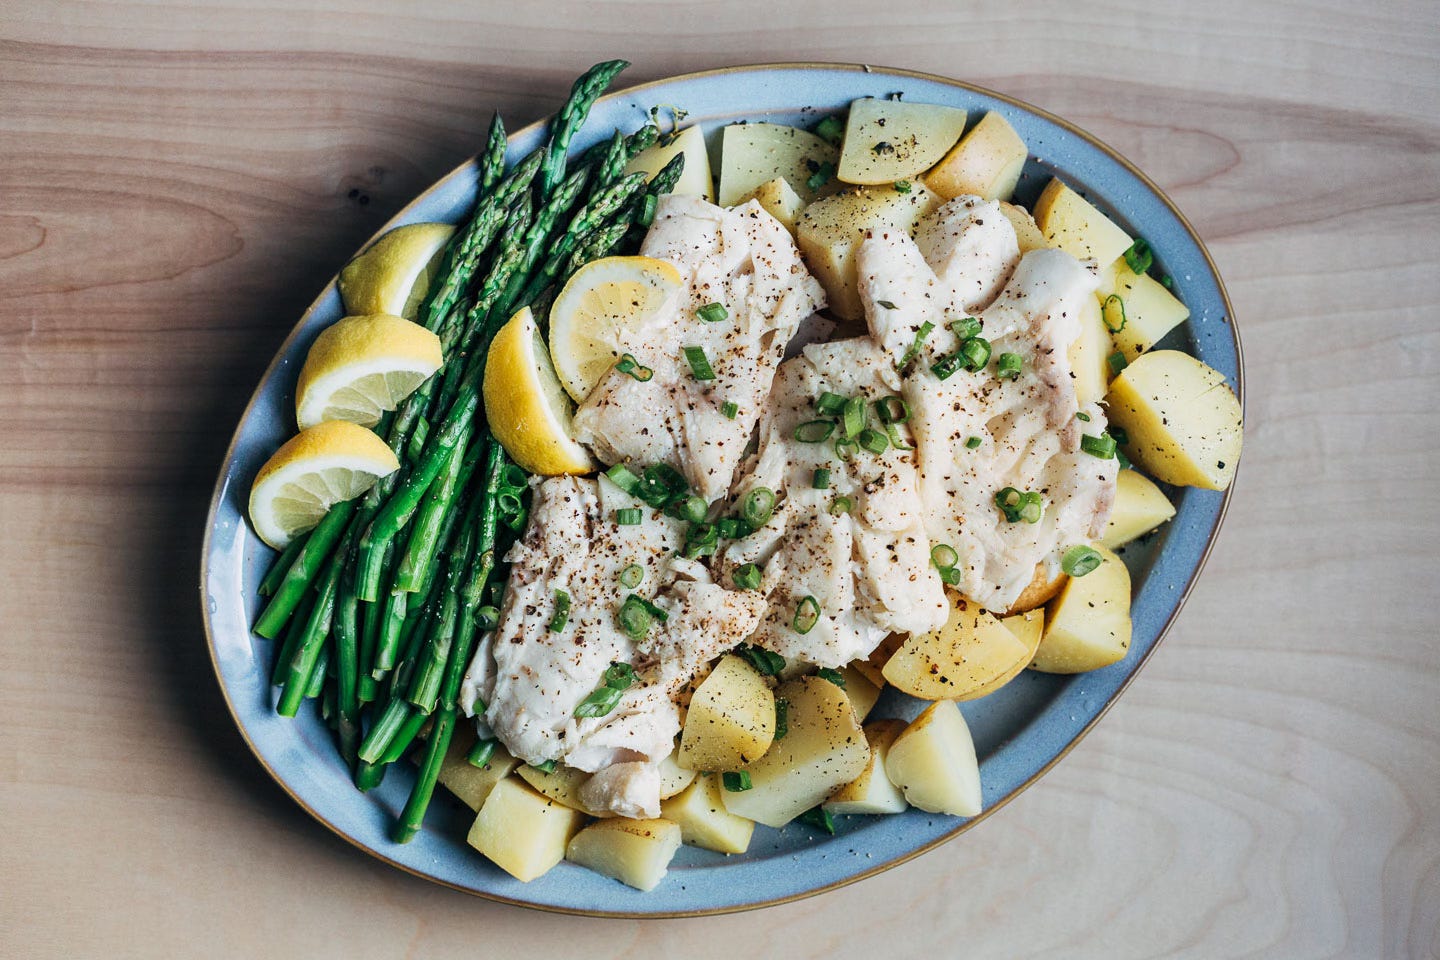 A platter with potatoes, cod, and asparagus